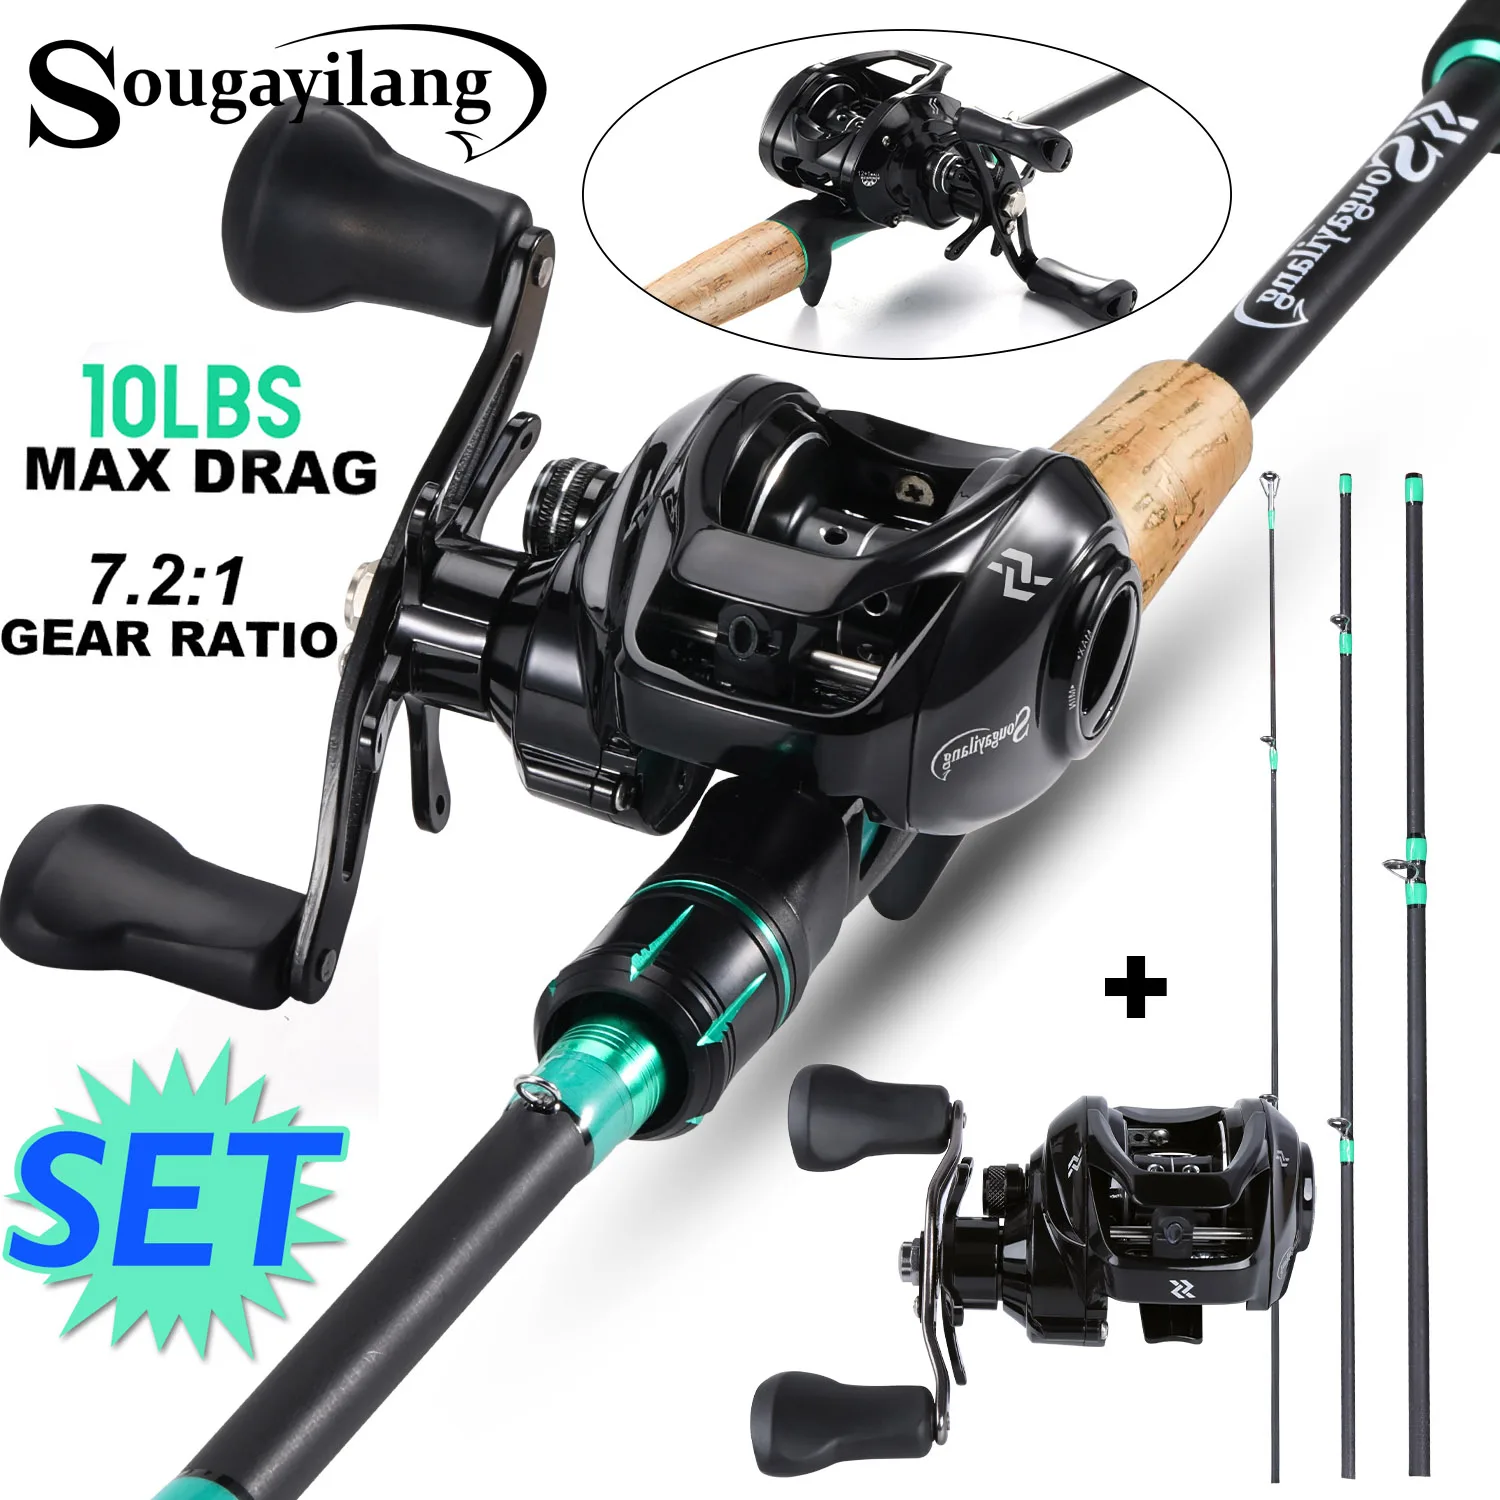 Sougayilang 1.8-2.4m Portable Telescopic Casting Fishing Rod and 17+1bb  7.2:1 Gear Ratio High Speed Fishing Reel Fishing Tackle